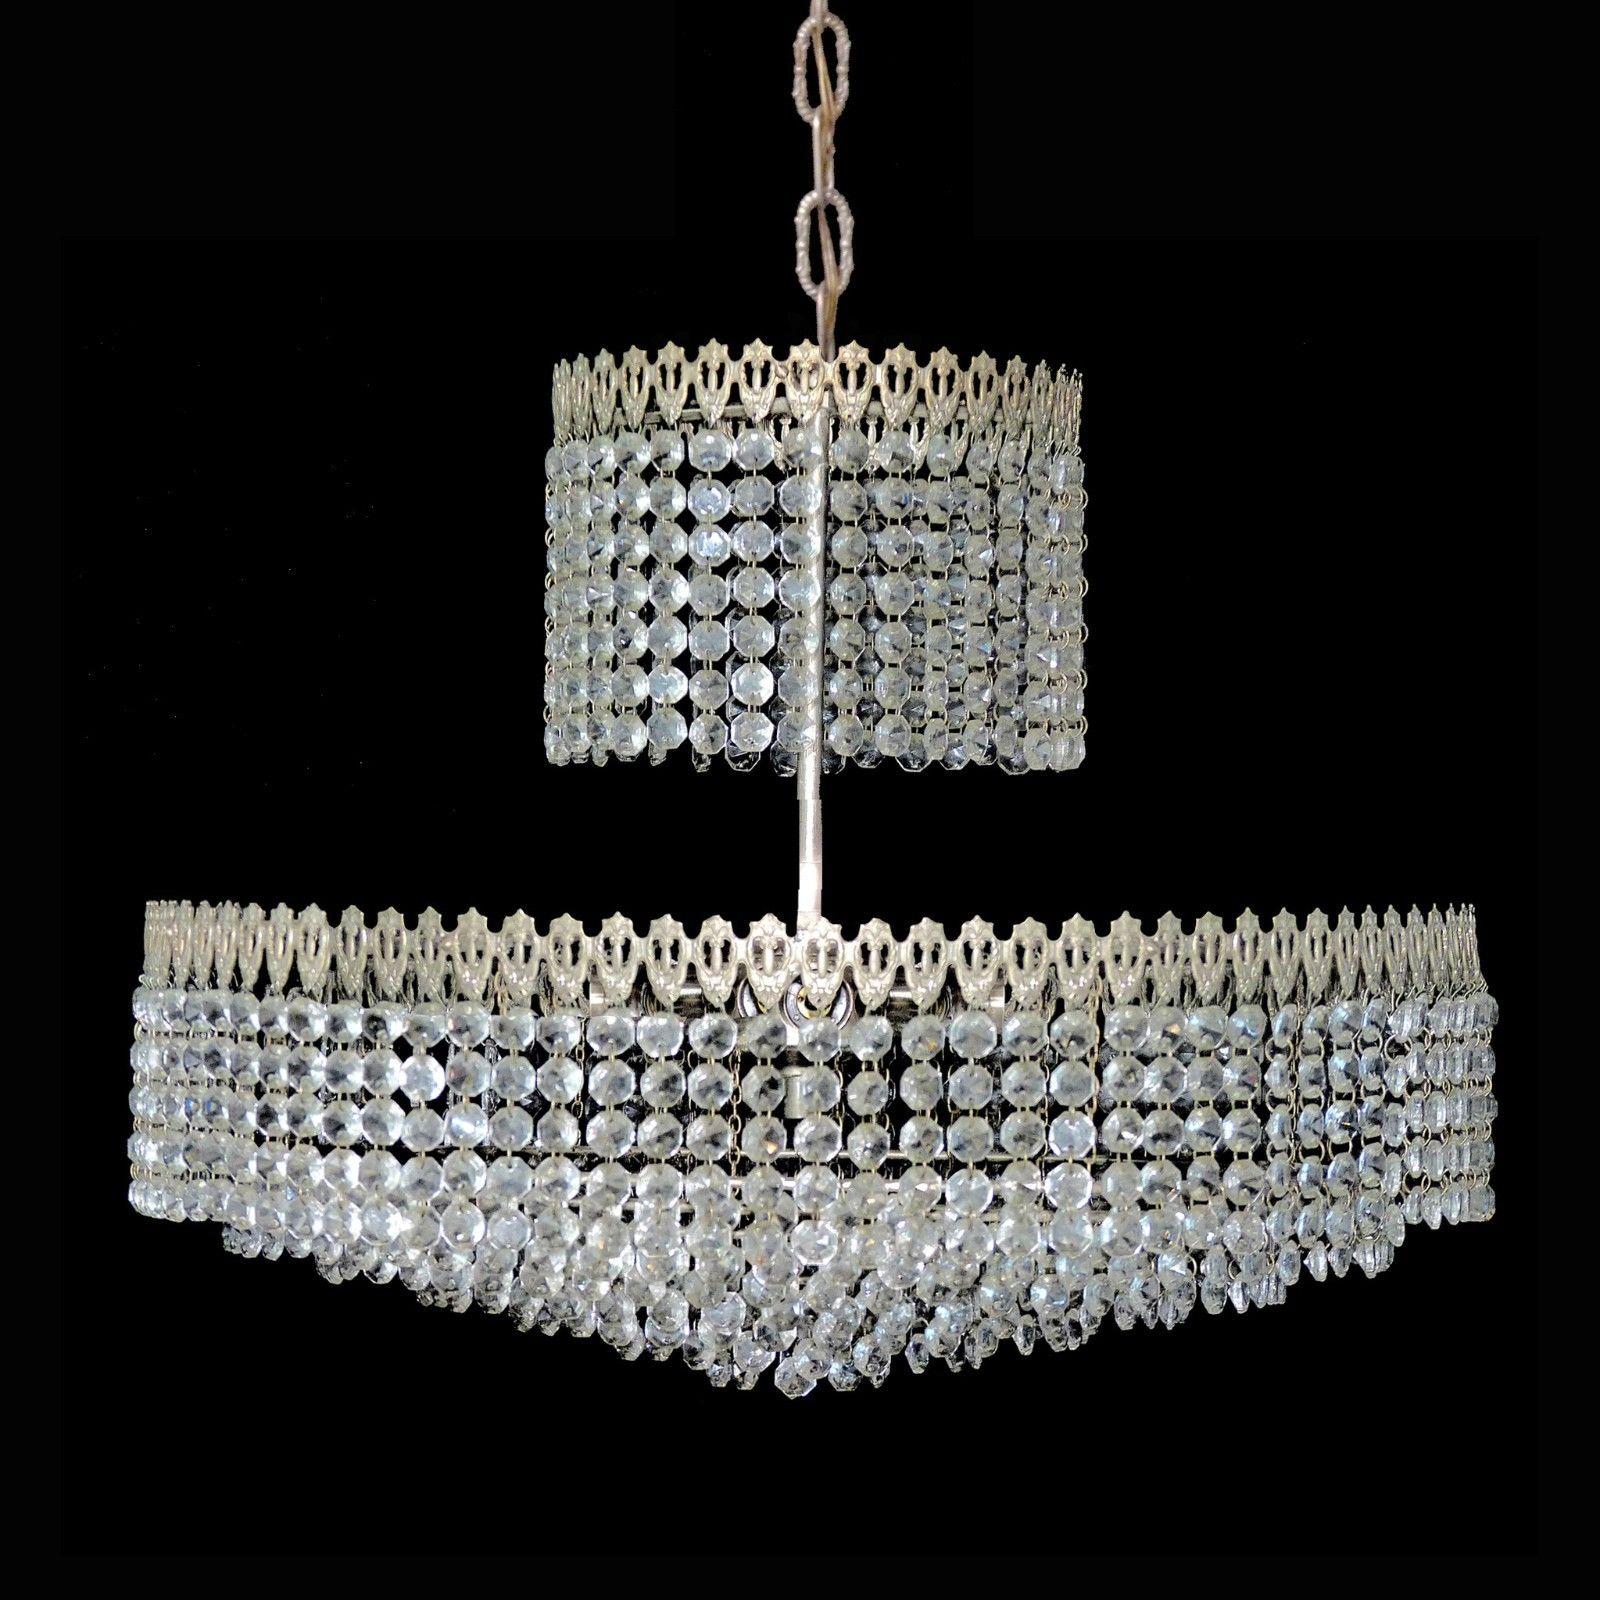 French Hollywood Regency Chrome Cut Crystal Beads 8tiers Wedding Cake Chandelier In Good Condition For Sale In Coimbra, PT